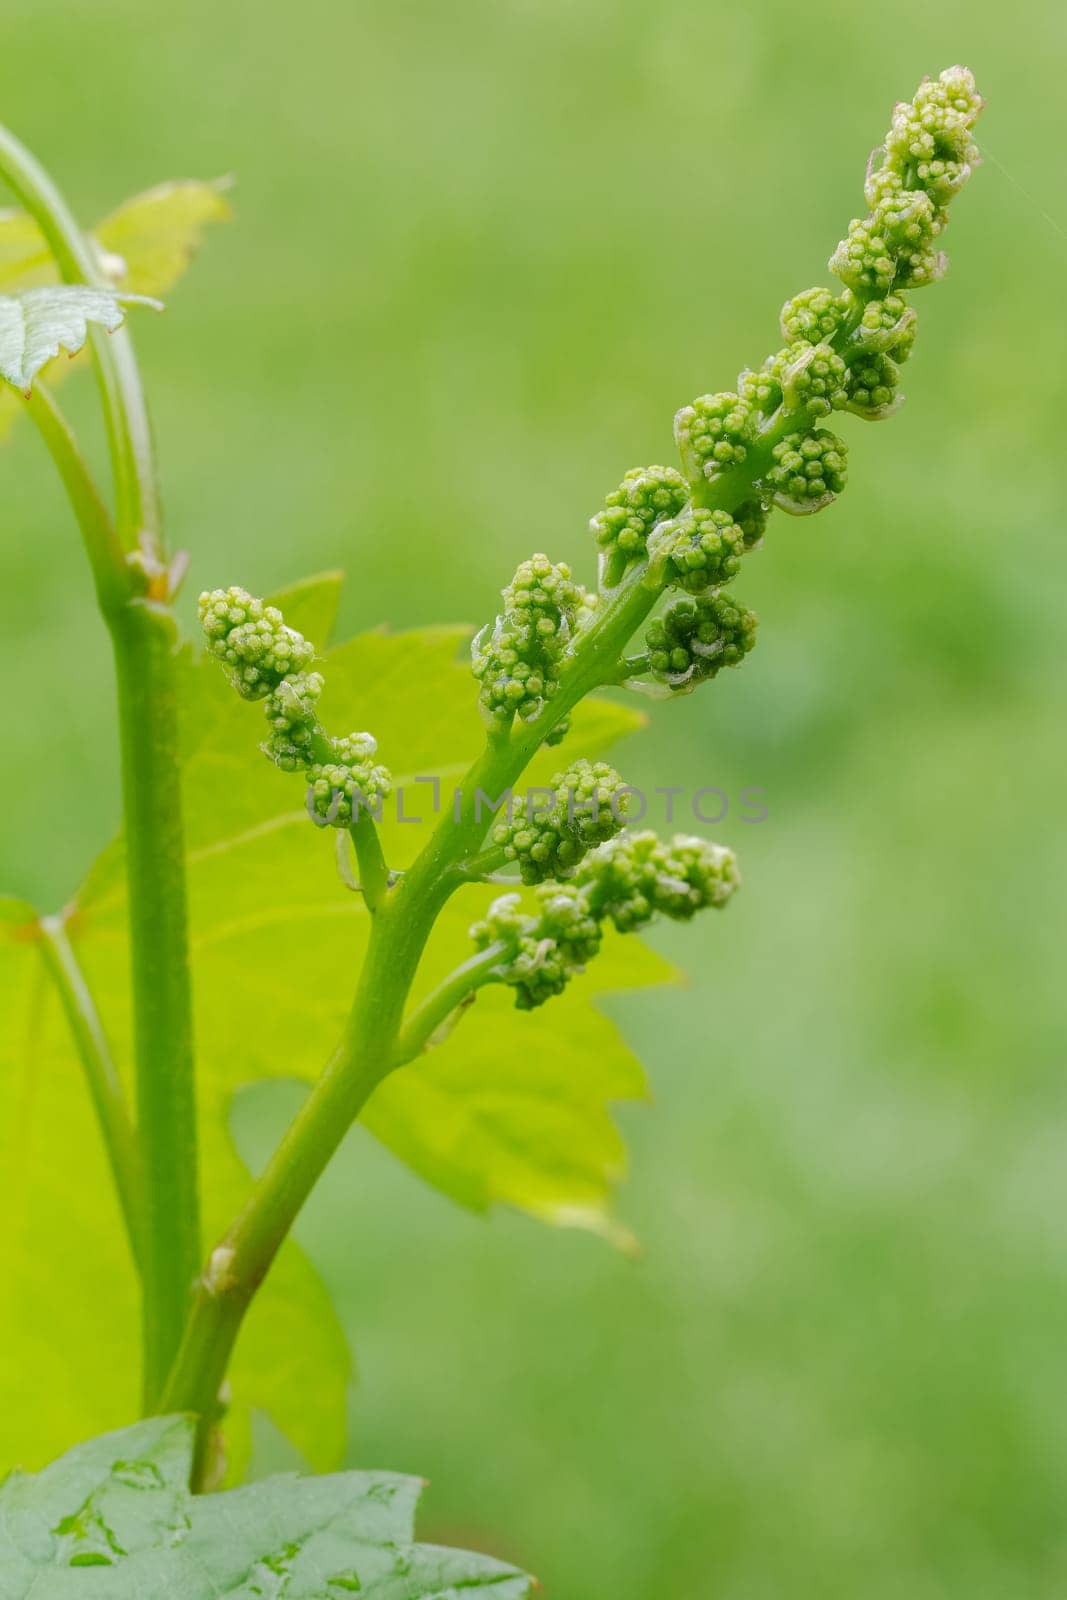 Blooming young wine grapes in vineyard in the spring time. by mvg6894